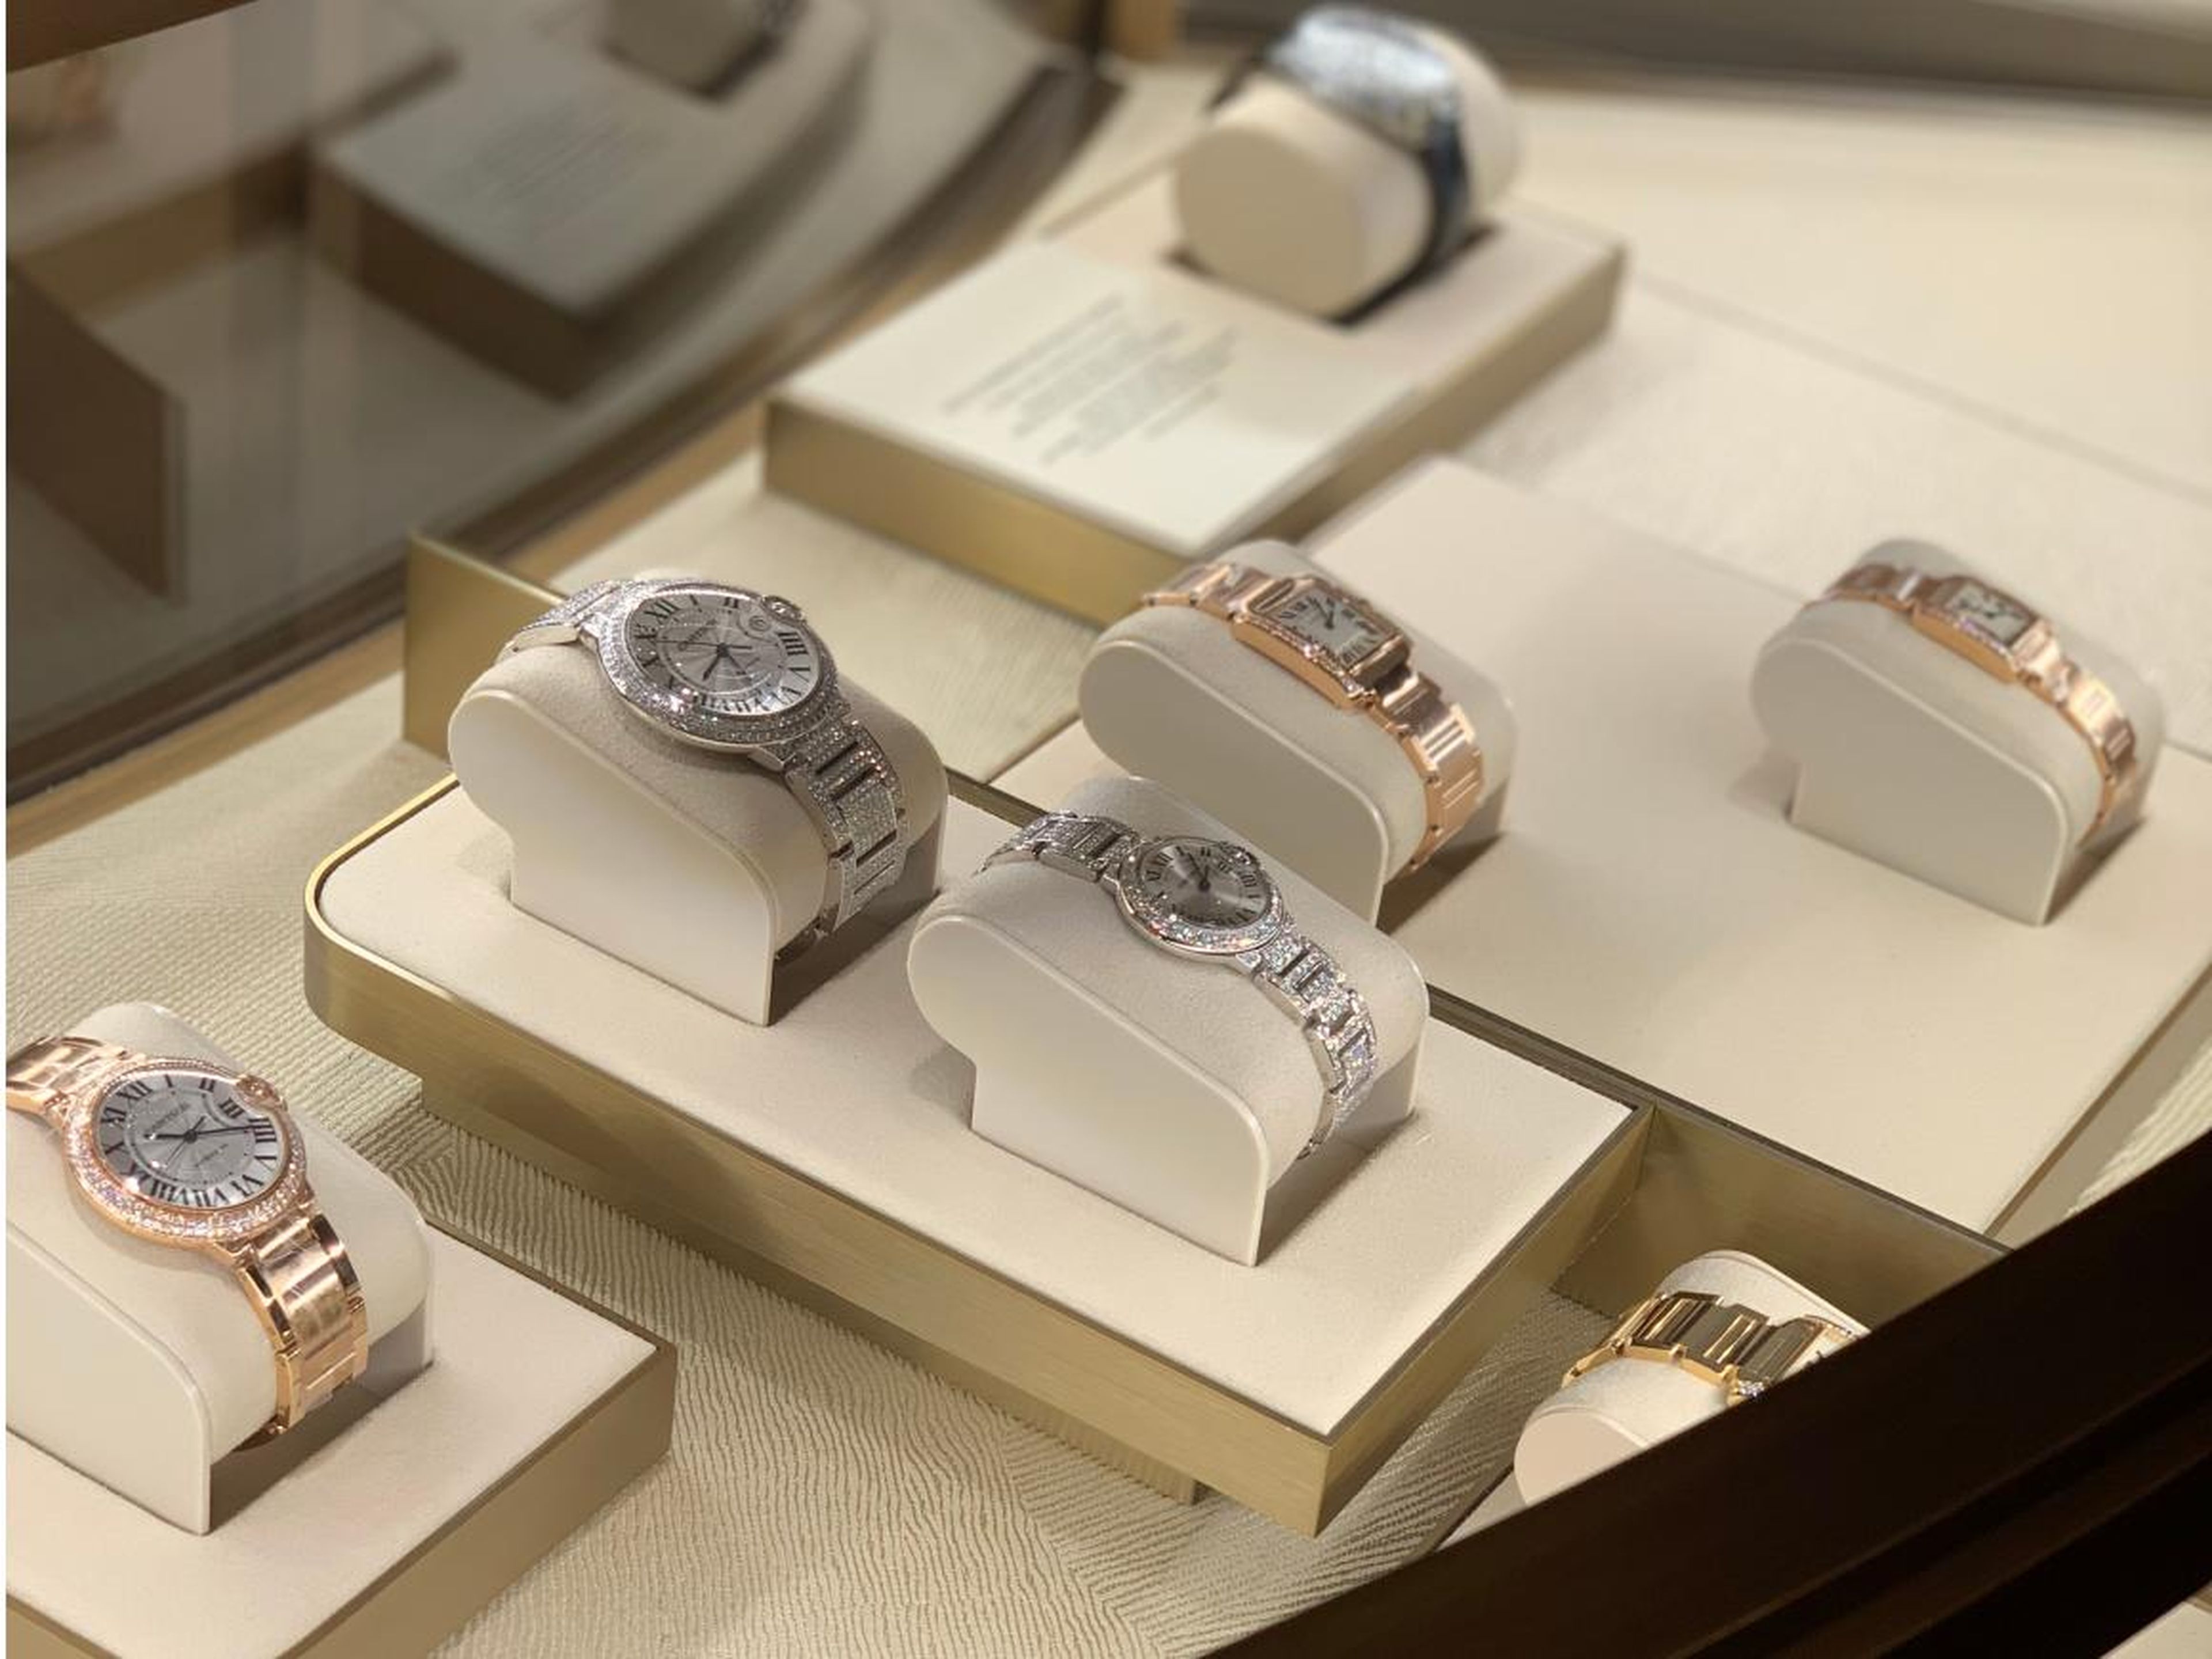 The "very special watch" is a client's 15th-anniversary gift for his wife.